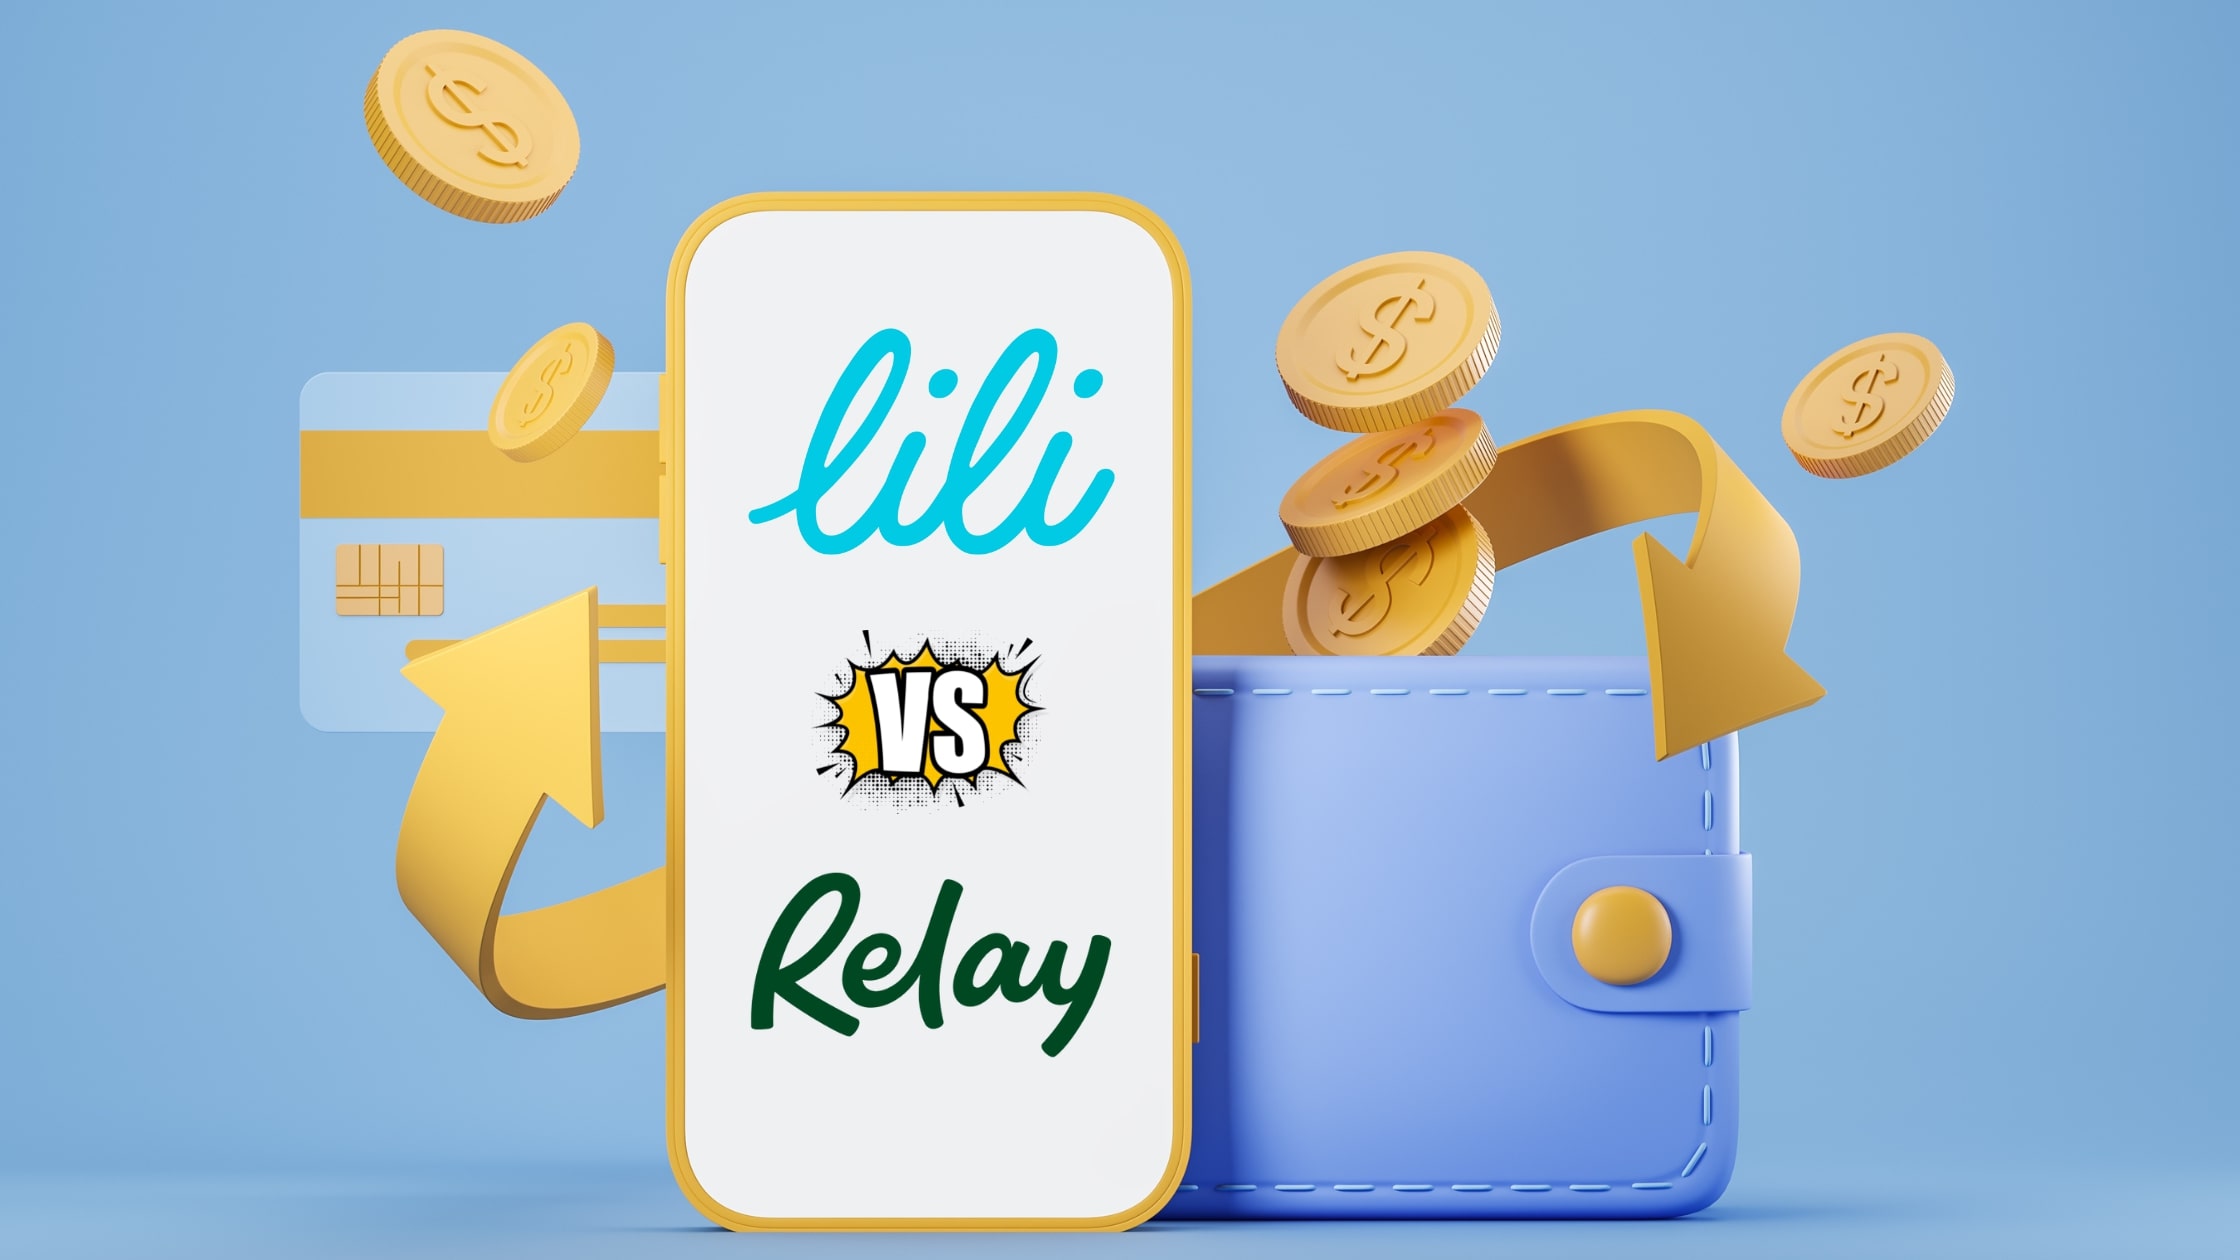 Lili Bank vs. Relay Bank: Which One Is Right For My Small Biz?